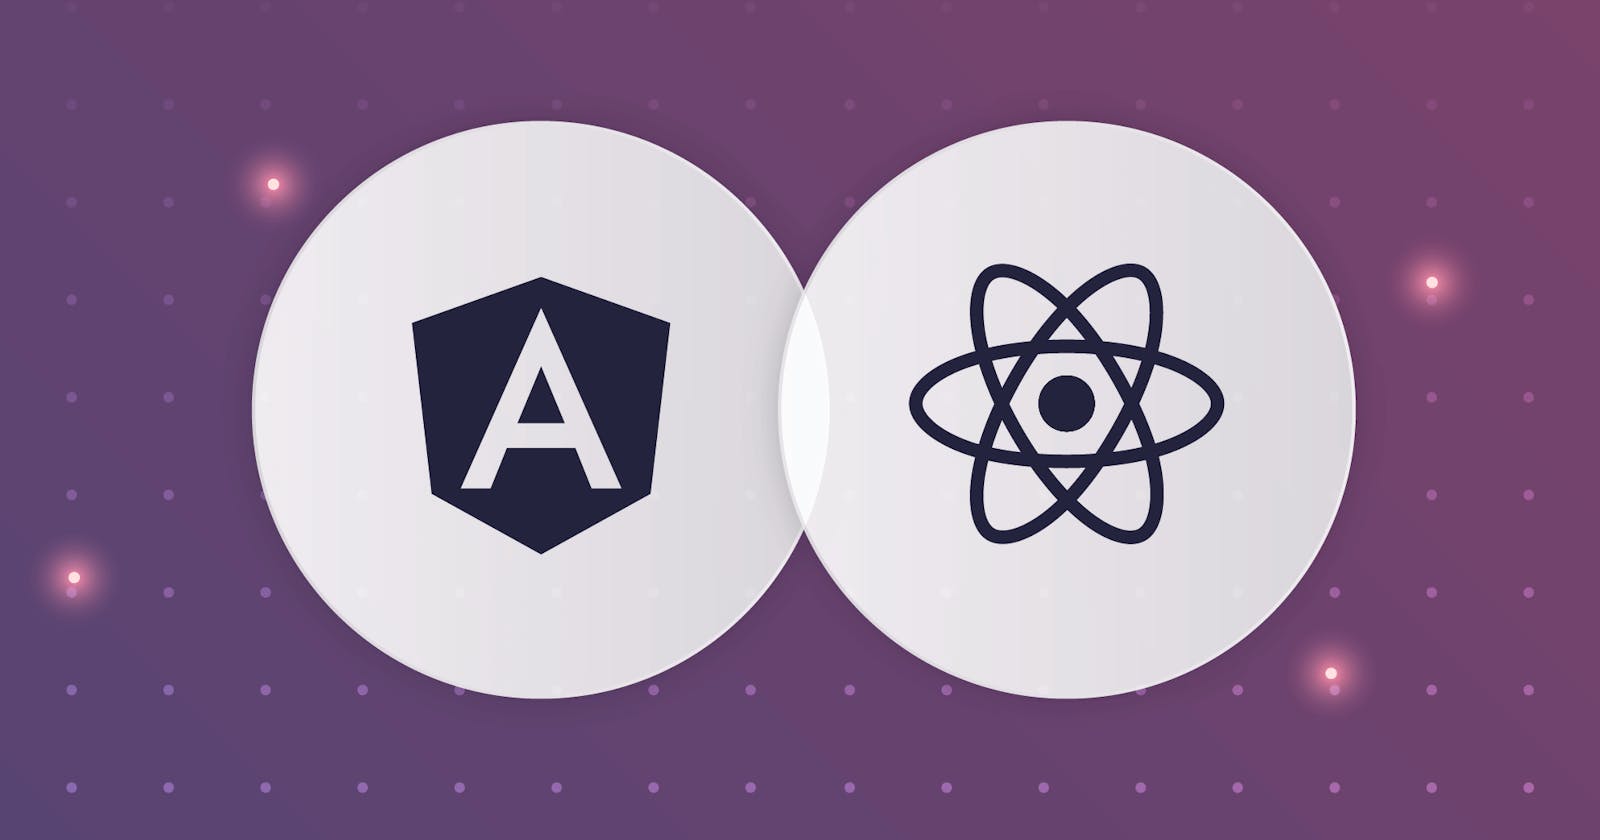 Which one is better between Angular and ReactJS?